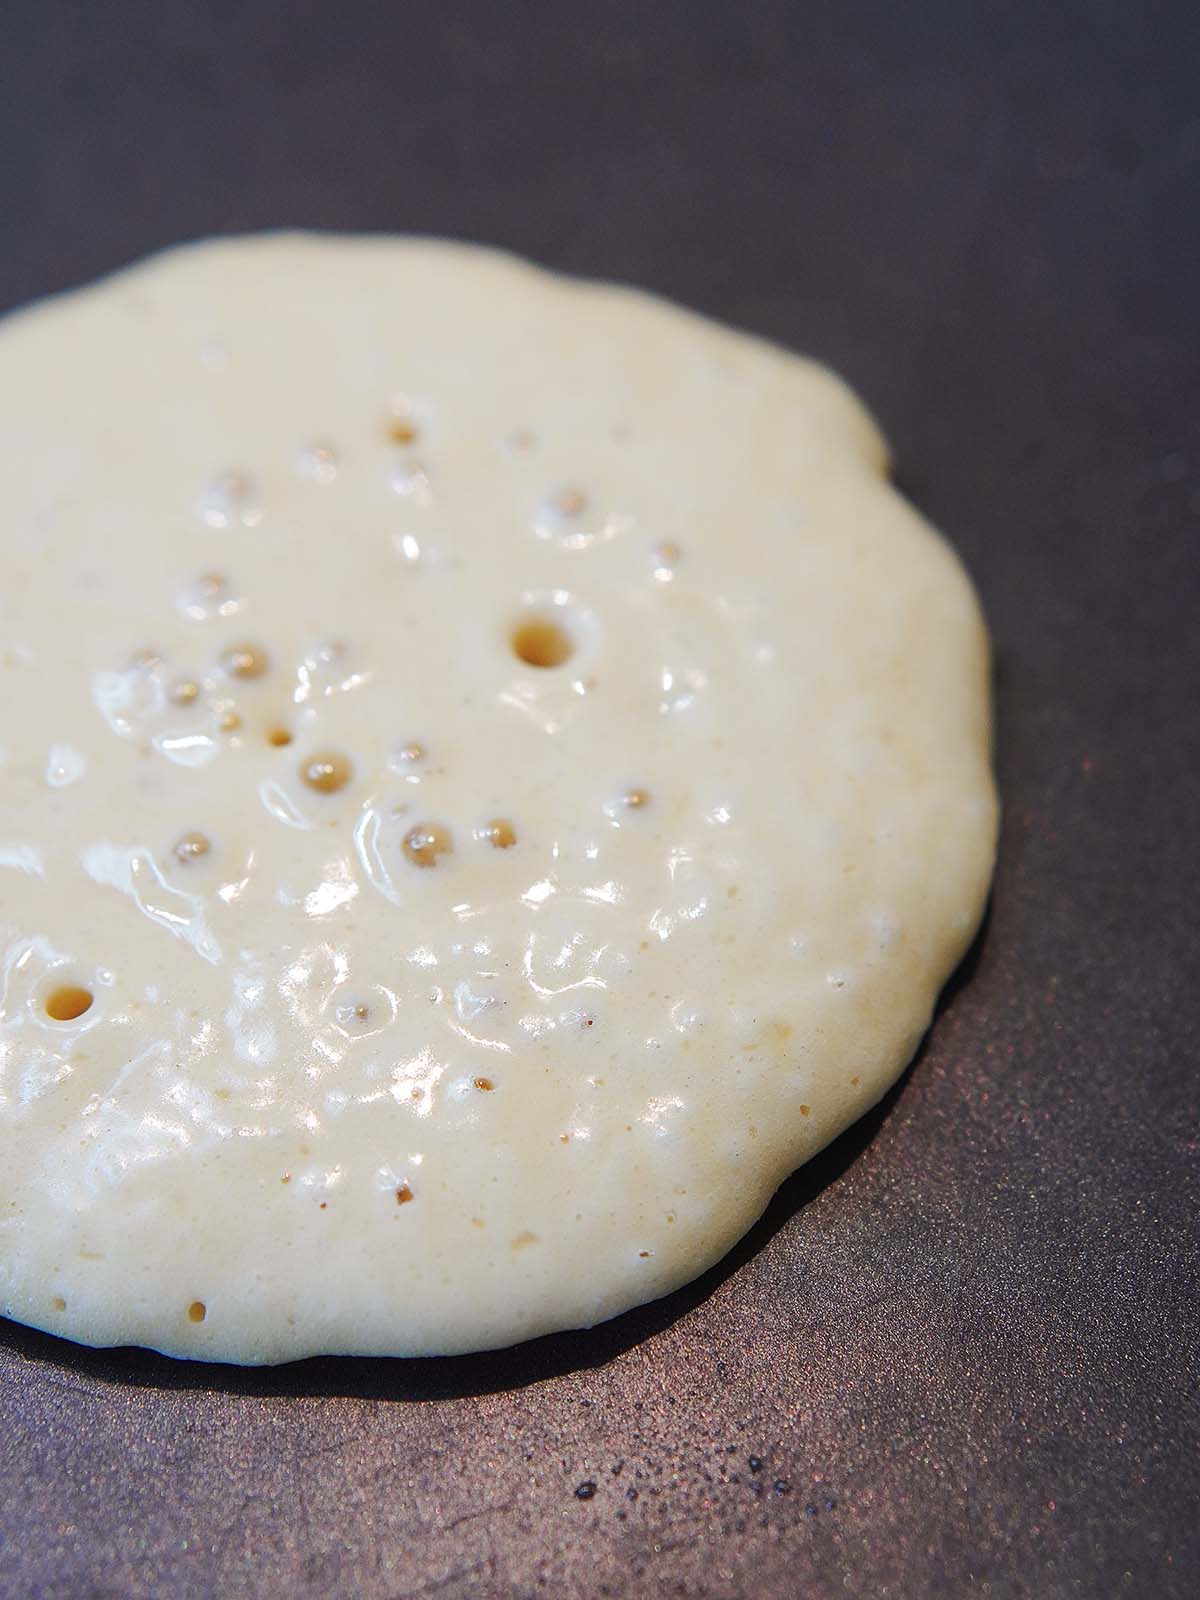 Cooking a pancake on a griddle.